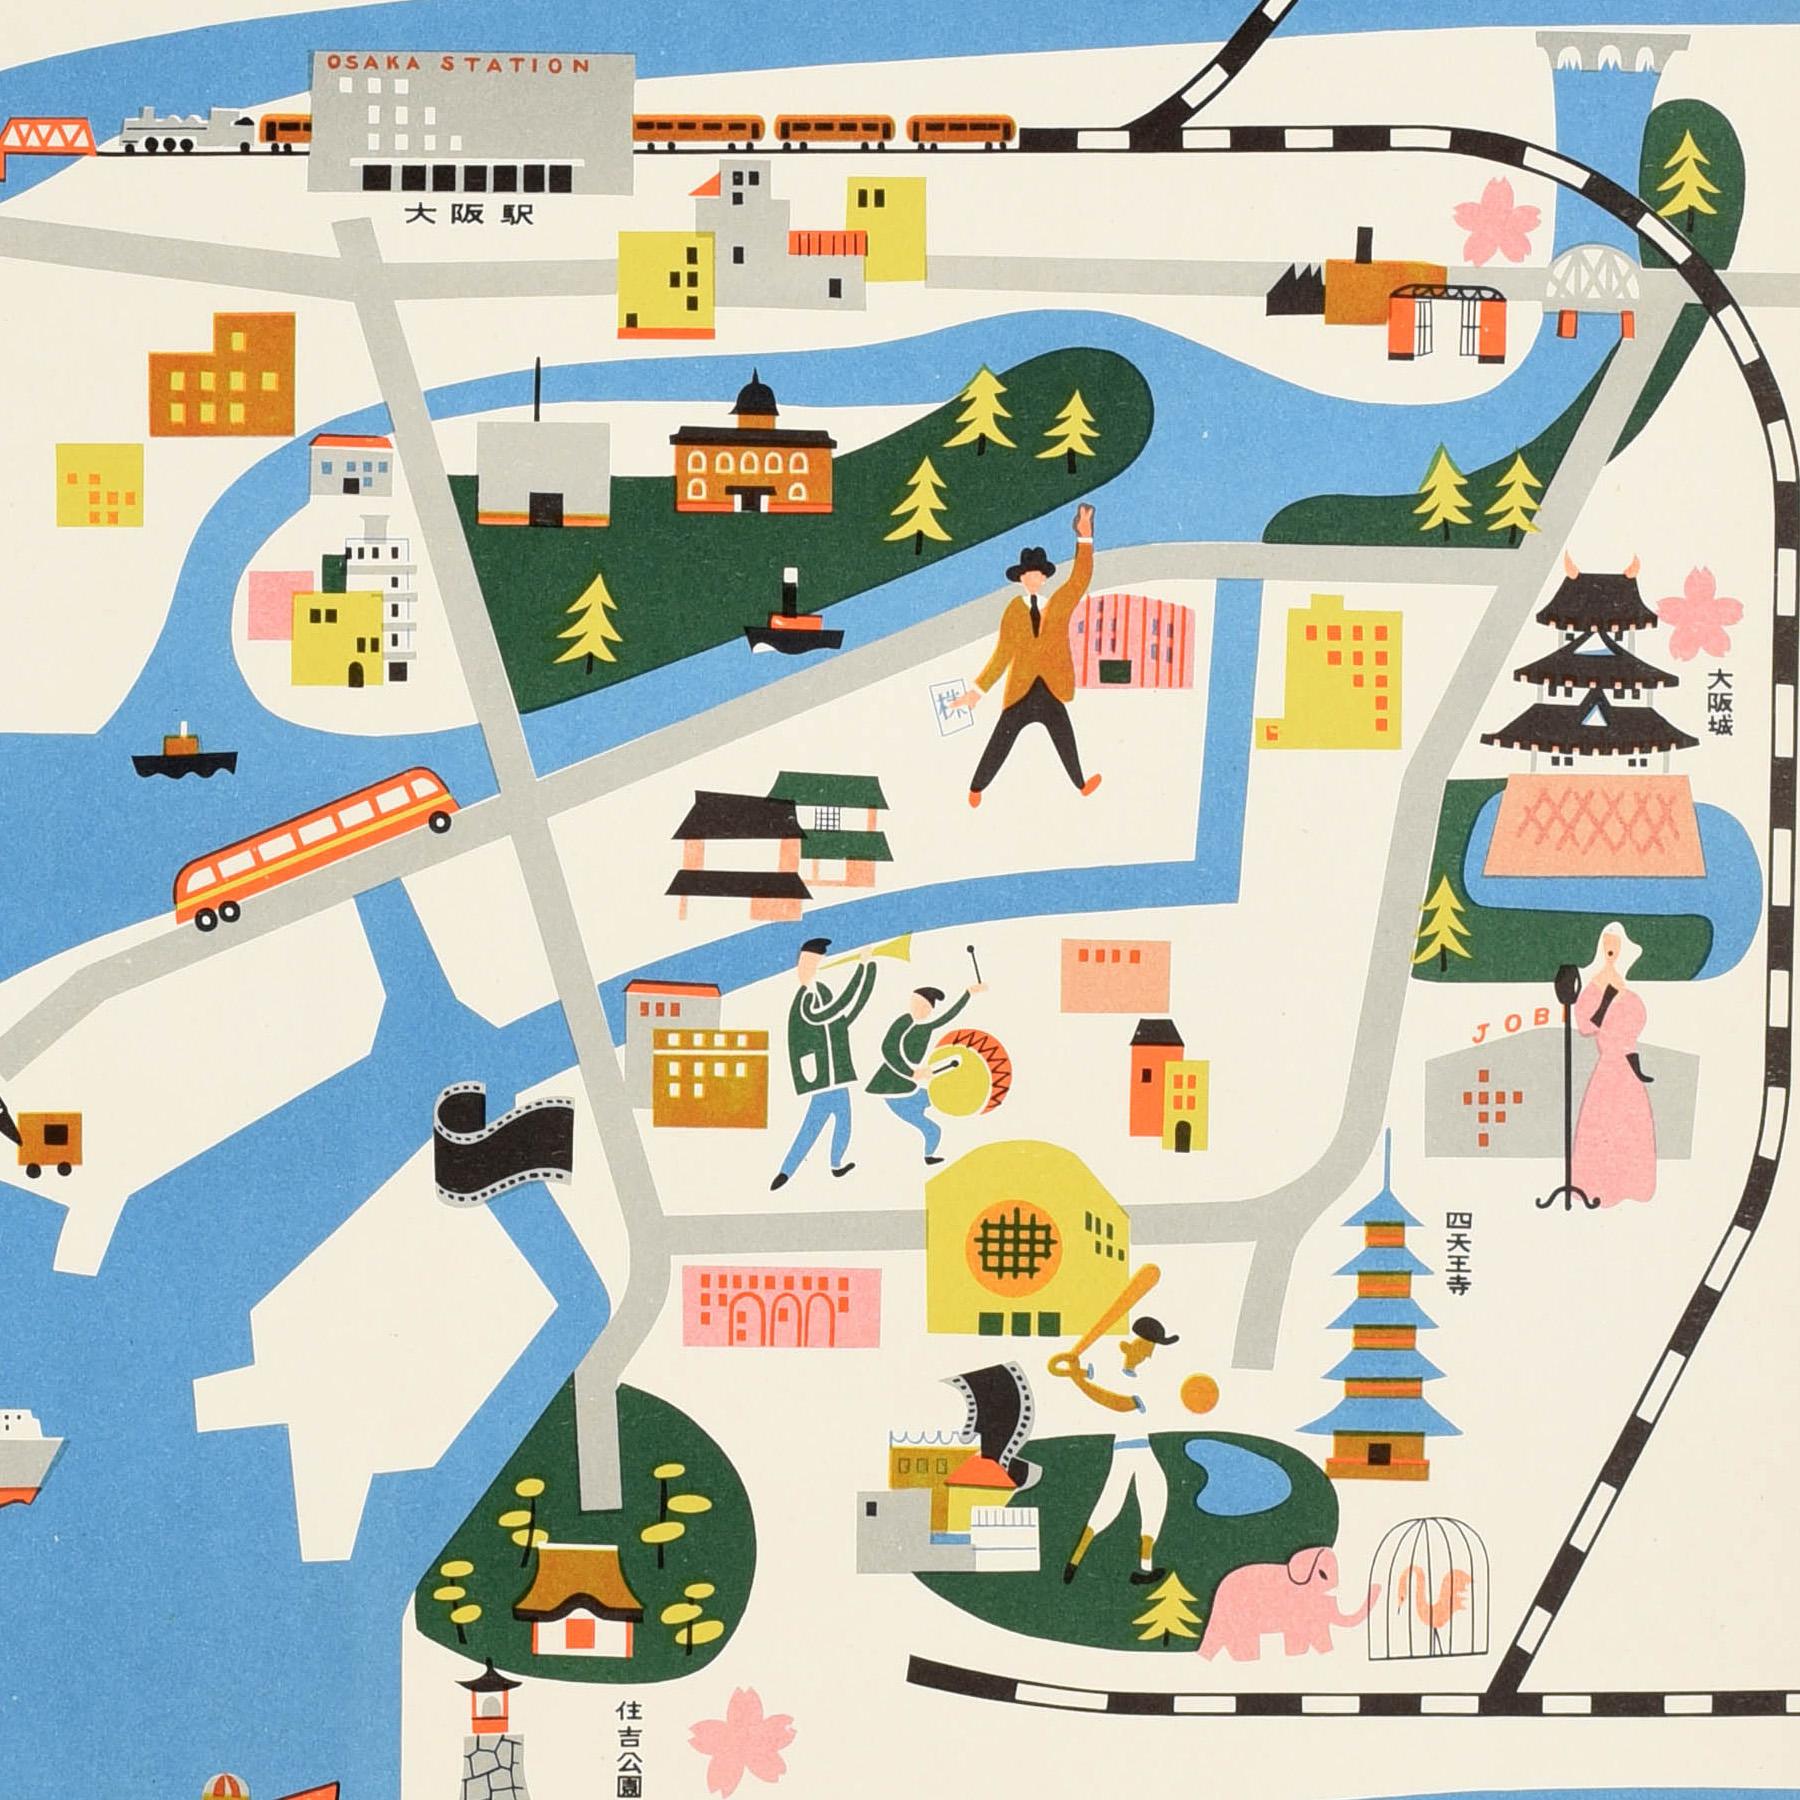 Original vintage railway travel poster for the Osaka Metro train - Regular Sightseeing - featuring a graphic design map of Osaka city with various illustrations including buildings and factories, trees and parks, ships and boats at sea in Osaka Bay,